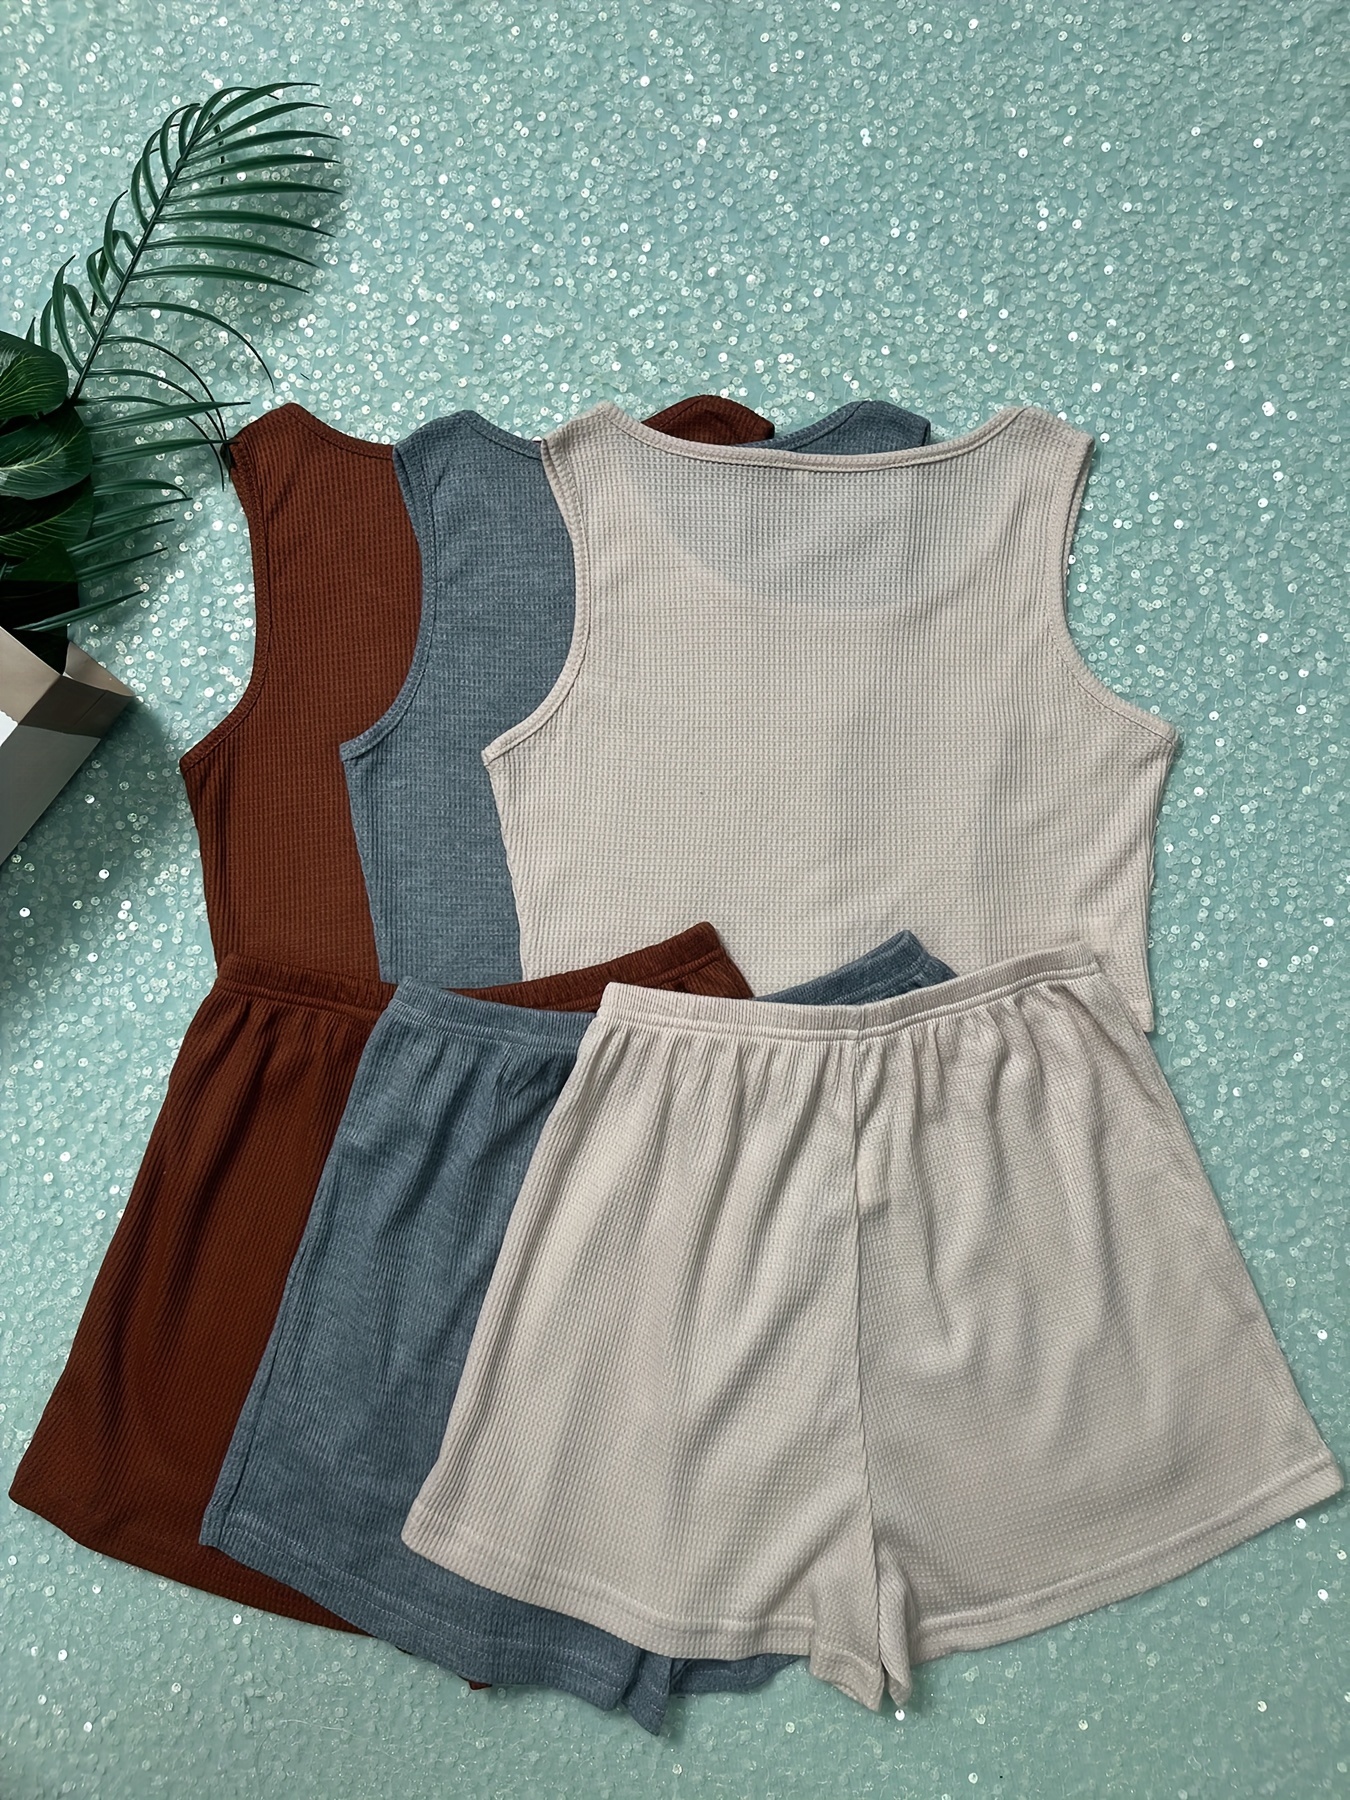 Womens Summer 2 Piece Outfits Shorts Sets Sleeveless Round Neck